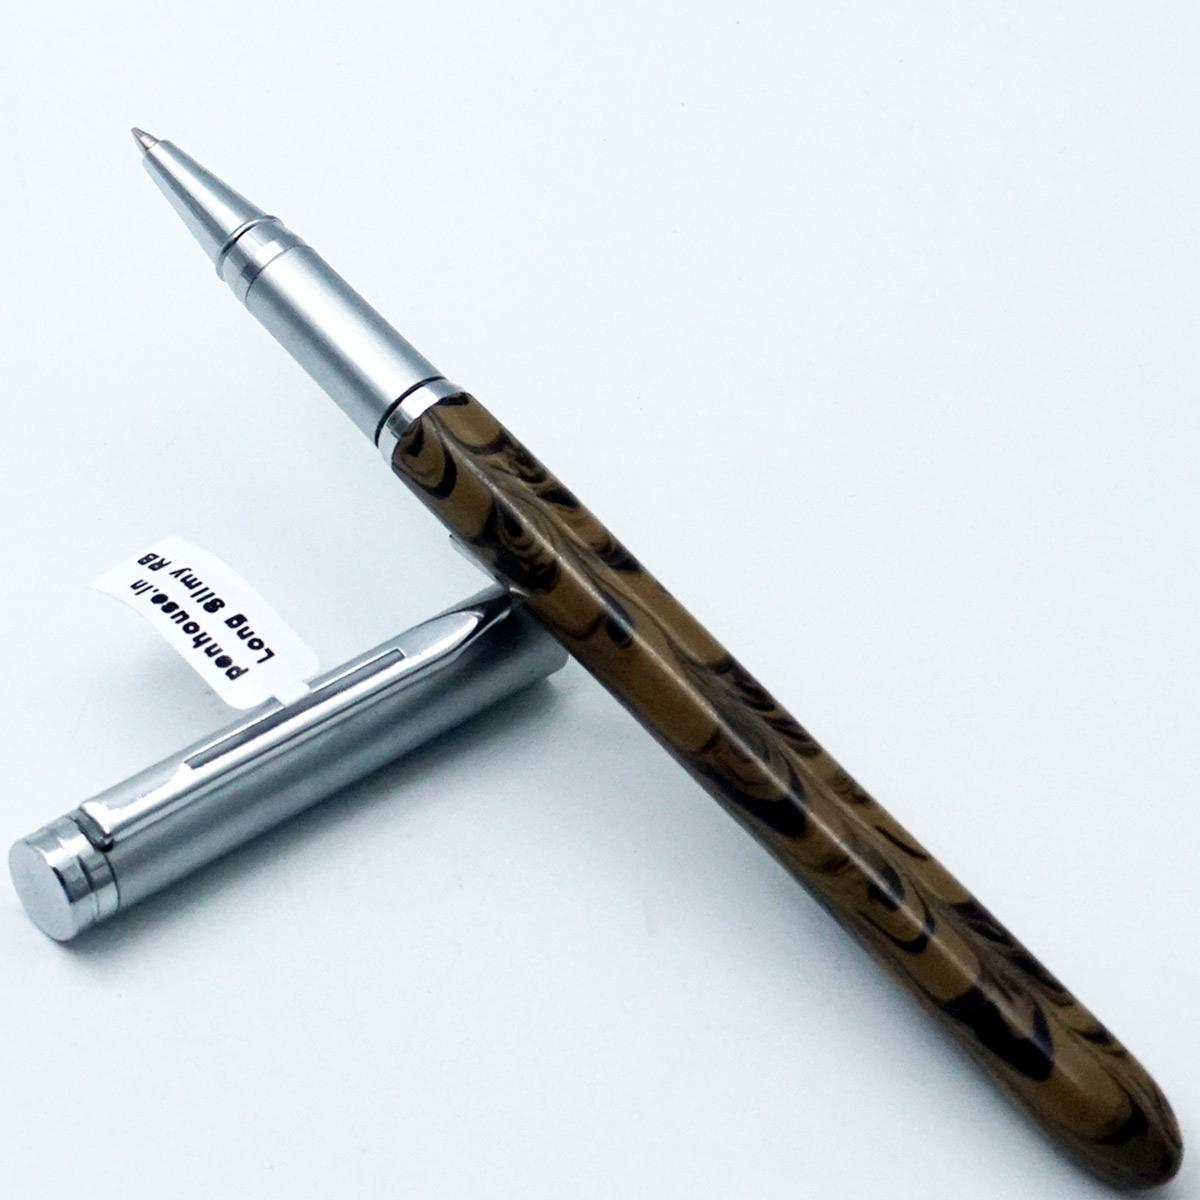 penhouse.in Handmade Long Slimy Brown With Black Color Ebonite Body With Round Bottom Silver Cap Medium Tip Roller Ball Pen SKU 95023